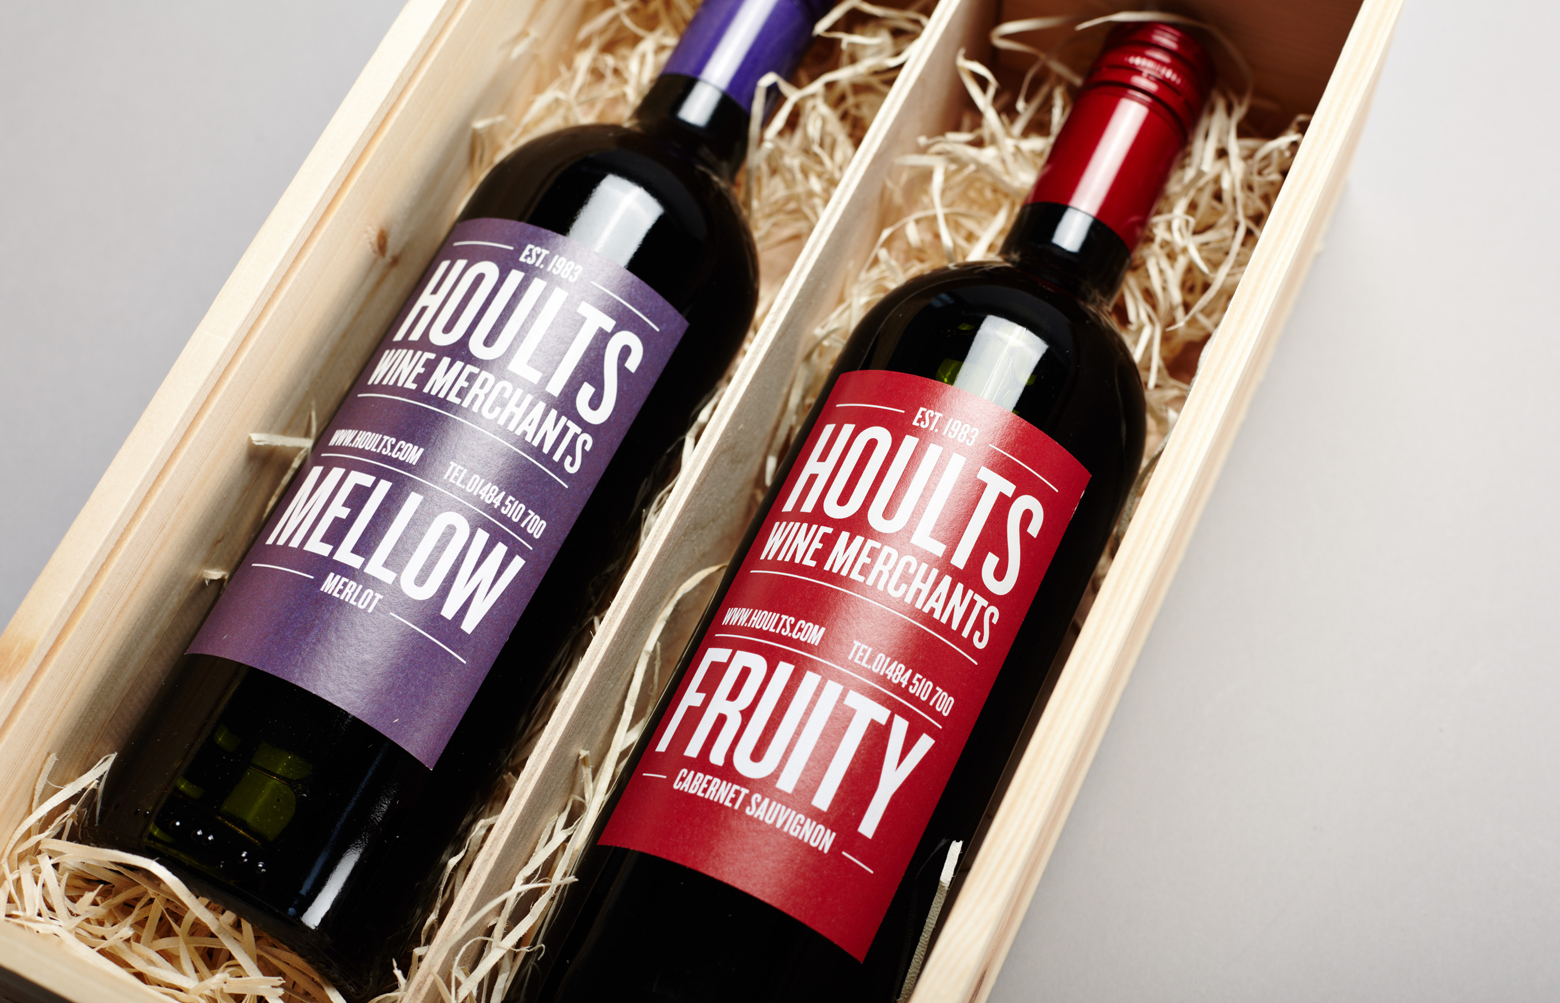 Hoults Wine Merchants, Huddersfield, Yorkshire — Own labels, Red